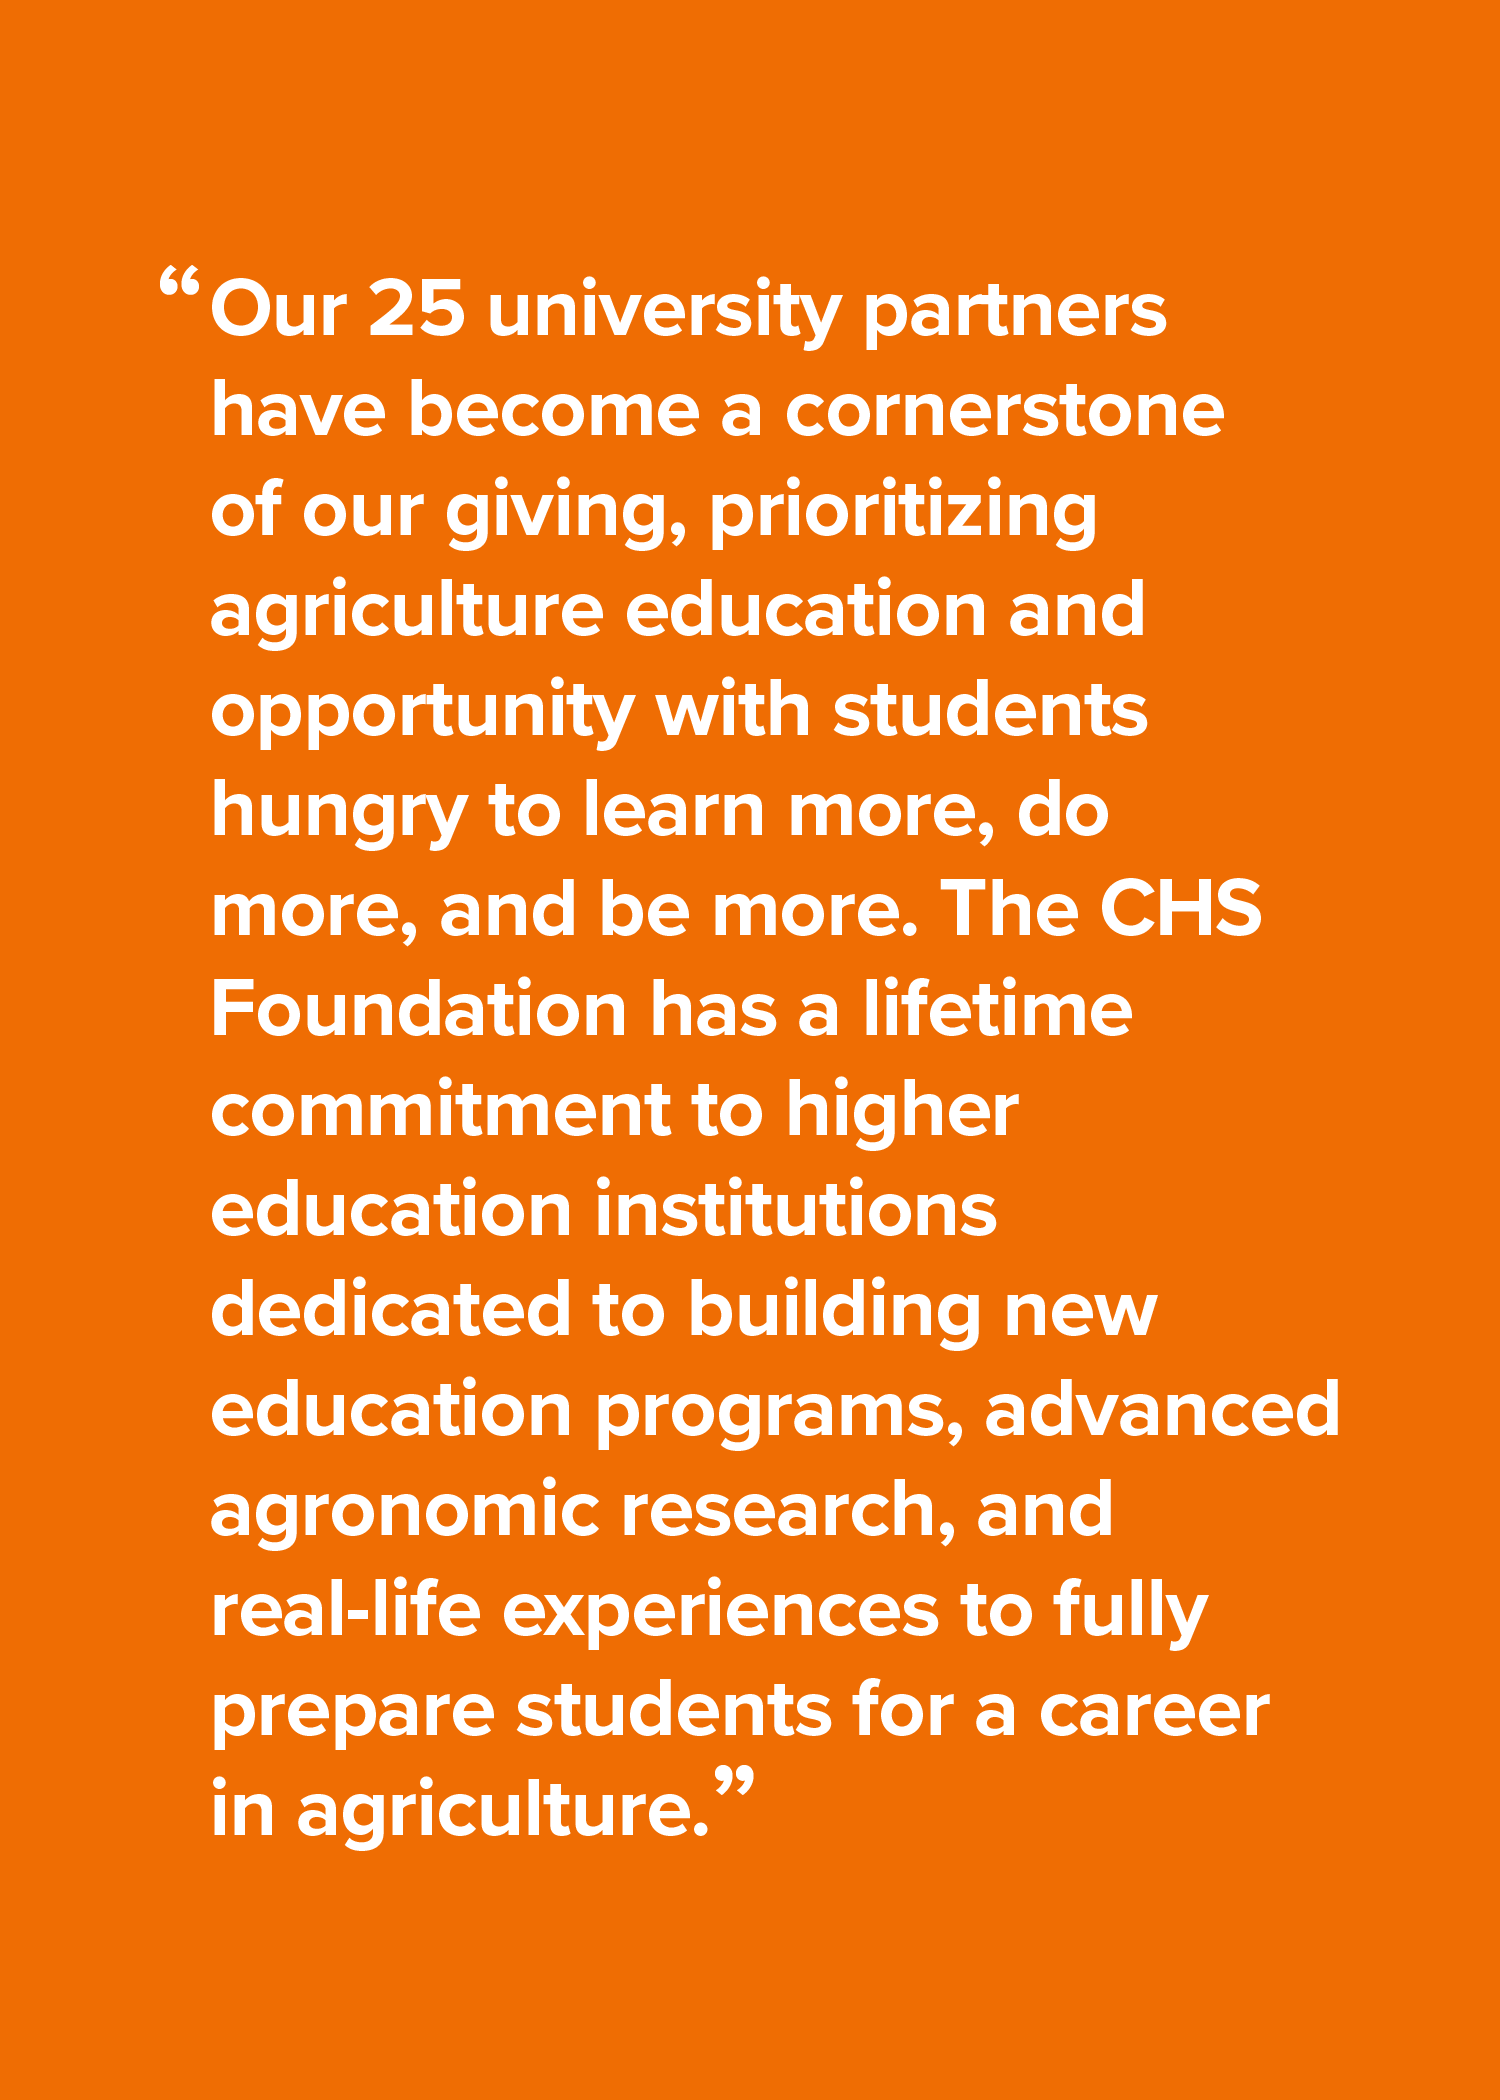 Our 25 university partners have become a cornerstone of our giving, prioritizing agriculture education and opportunity with students hungry to learn more, do more, and be more. The CHS Foundation has a lifetime commitment to higher education institutions dedicated to building new education programs, advanced agronomic research, and real-life experiences to fully prepare students for a career in agriculture.